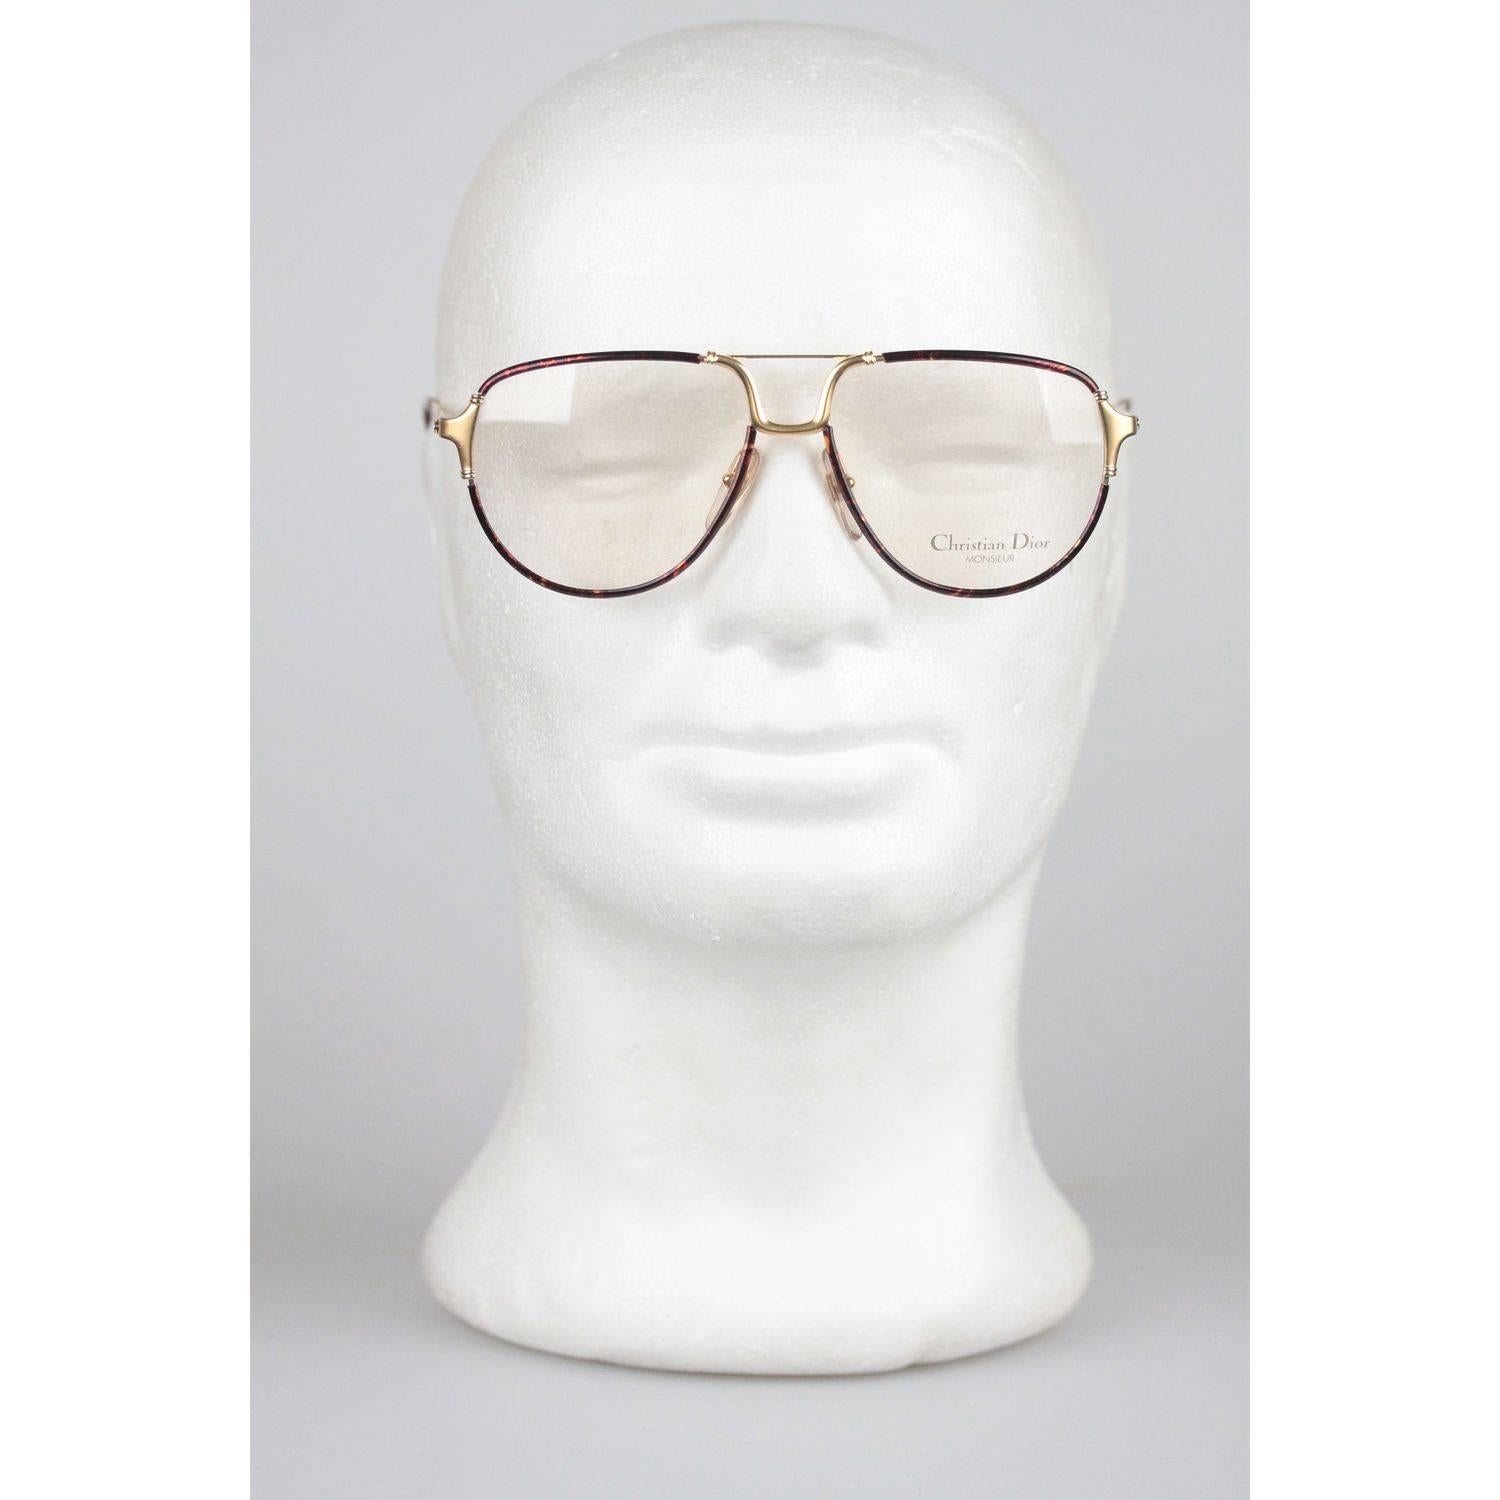 - CHRISTIAN DIOR MONSIEUR eyeglasses, Made in Germany
- Rare 1980s cult vintage frame 
Brown marbled frame, with gold metal finish on the front & arms
- CD decor logo on the side
- DIOR demo/clear original lens
Measurements:
-Temple lenght: 140